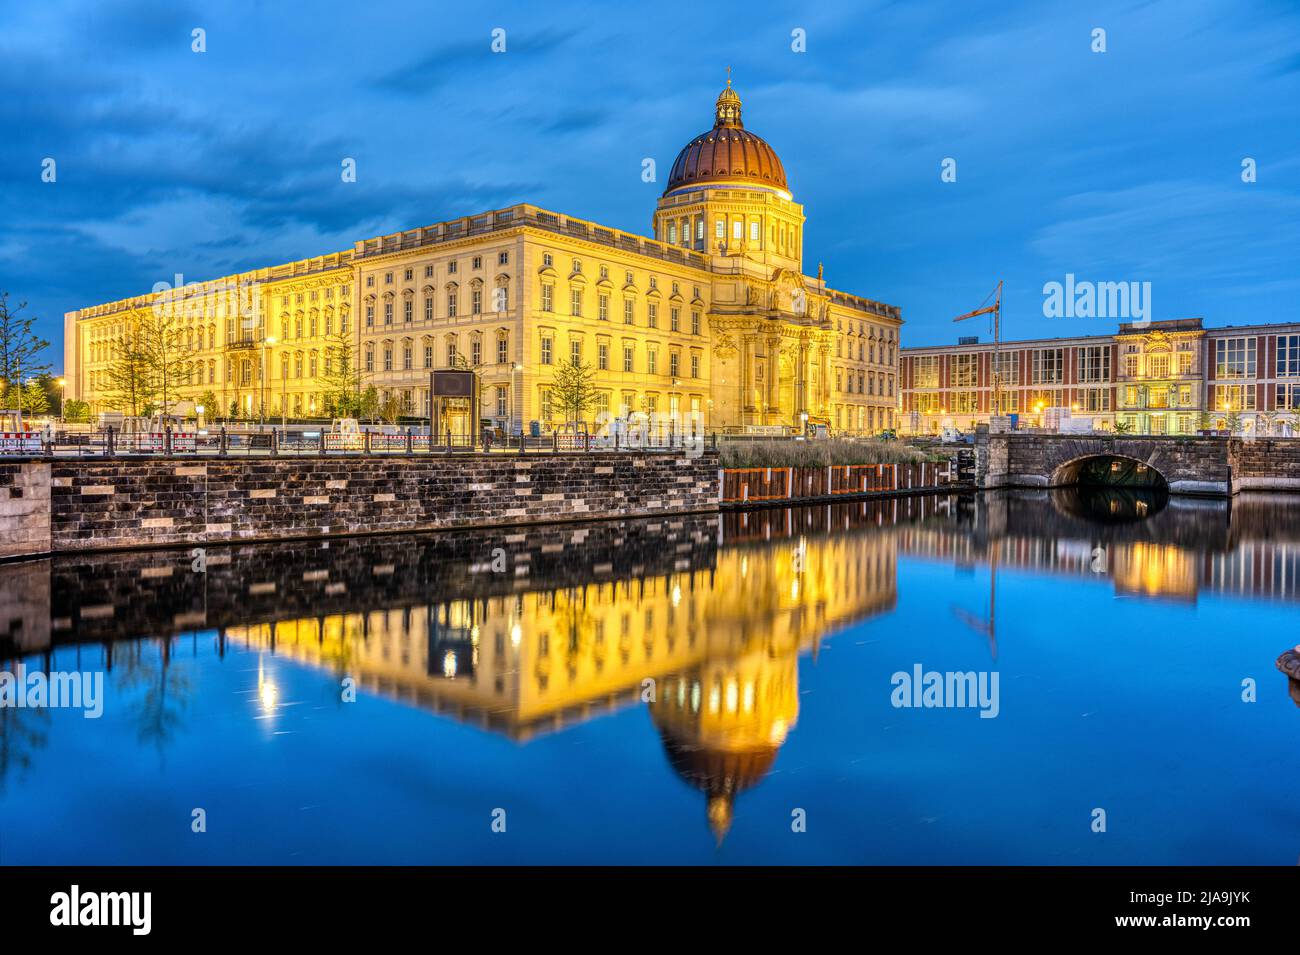 The imposing reconstructed City Palace in Berlin at night reflected in a small canal Stock Photo